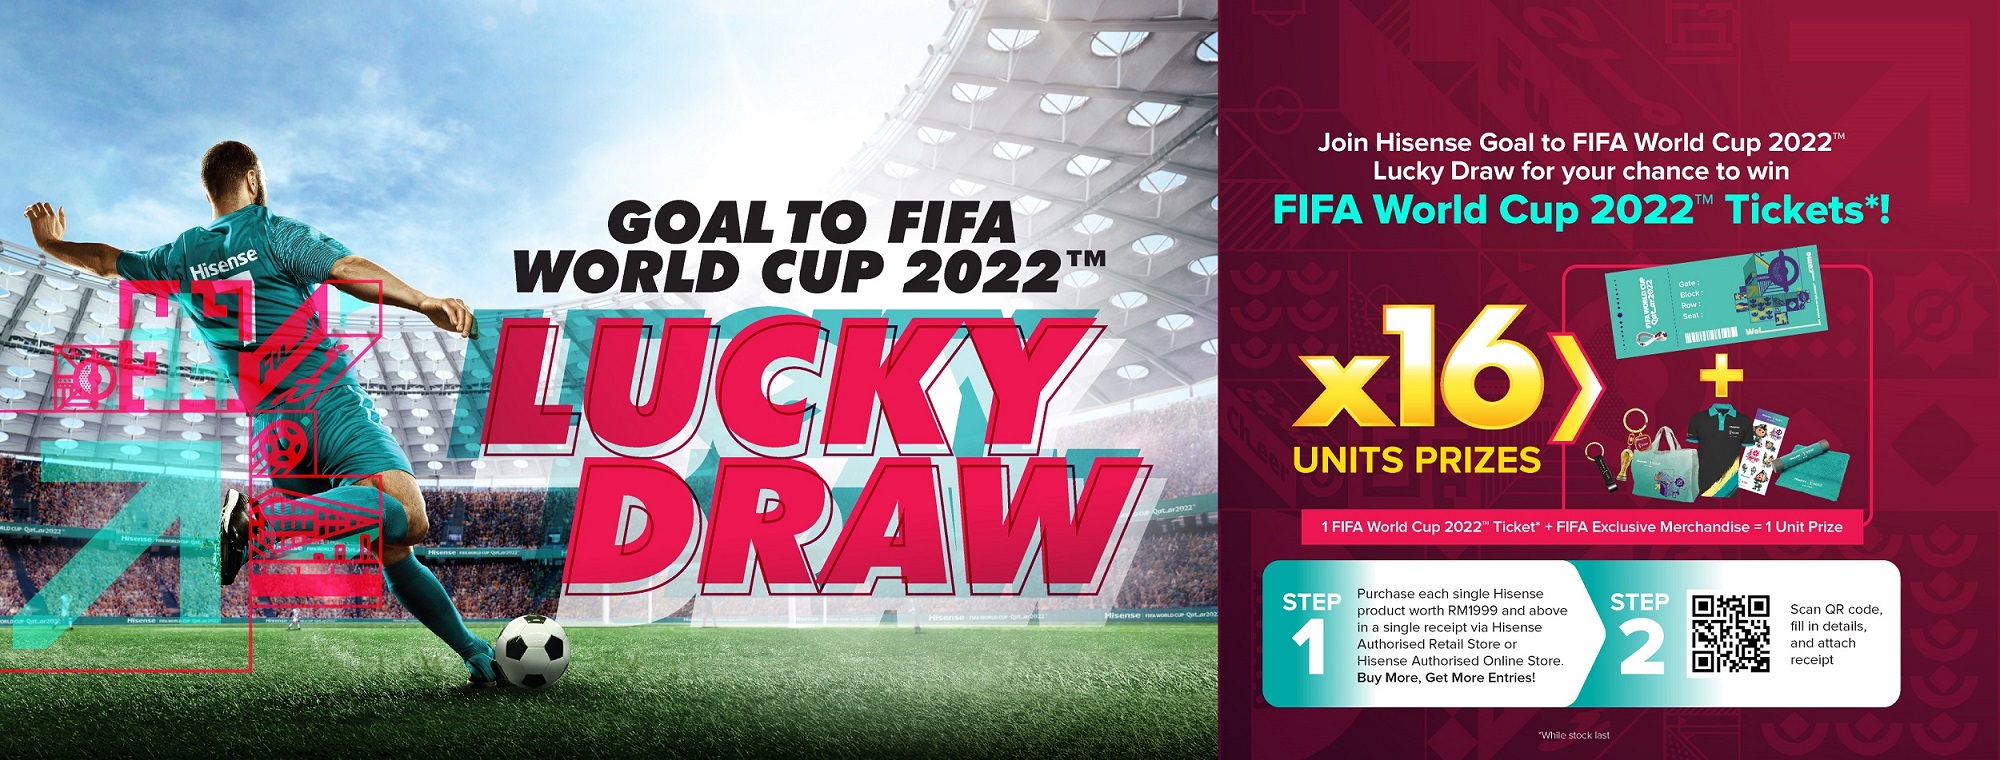 Visual Goal To FIFA World Cup 2022 Lucky Draw